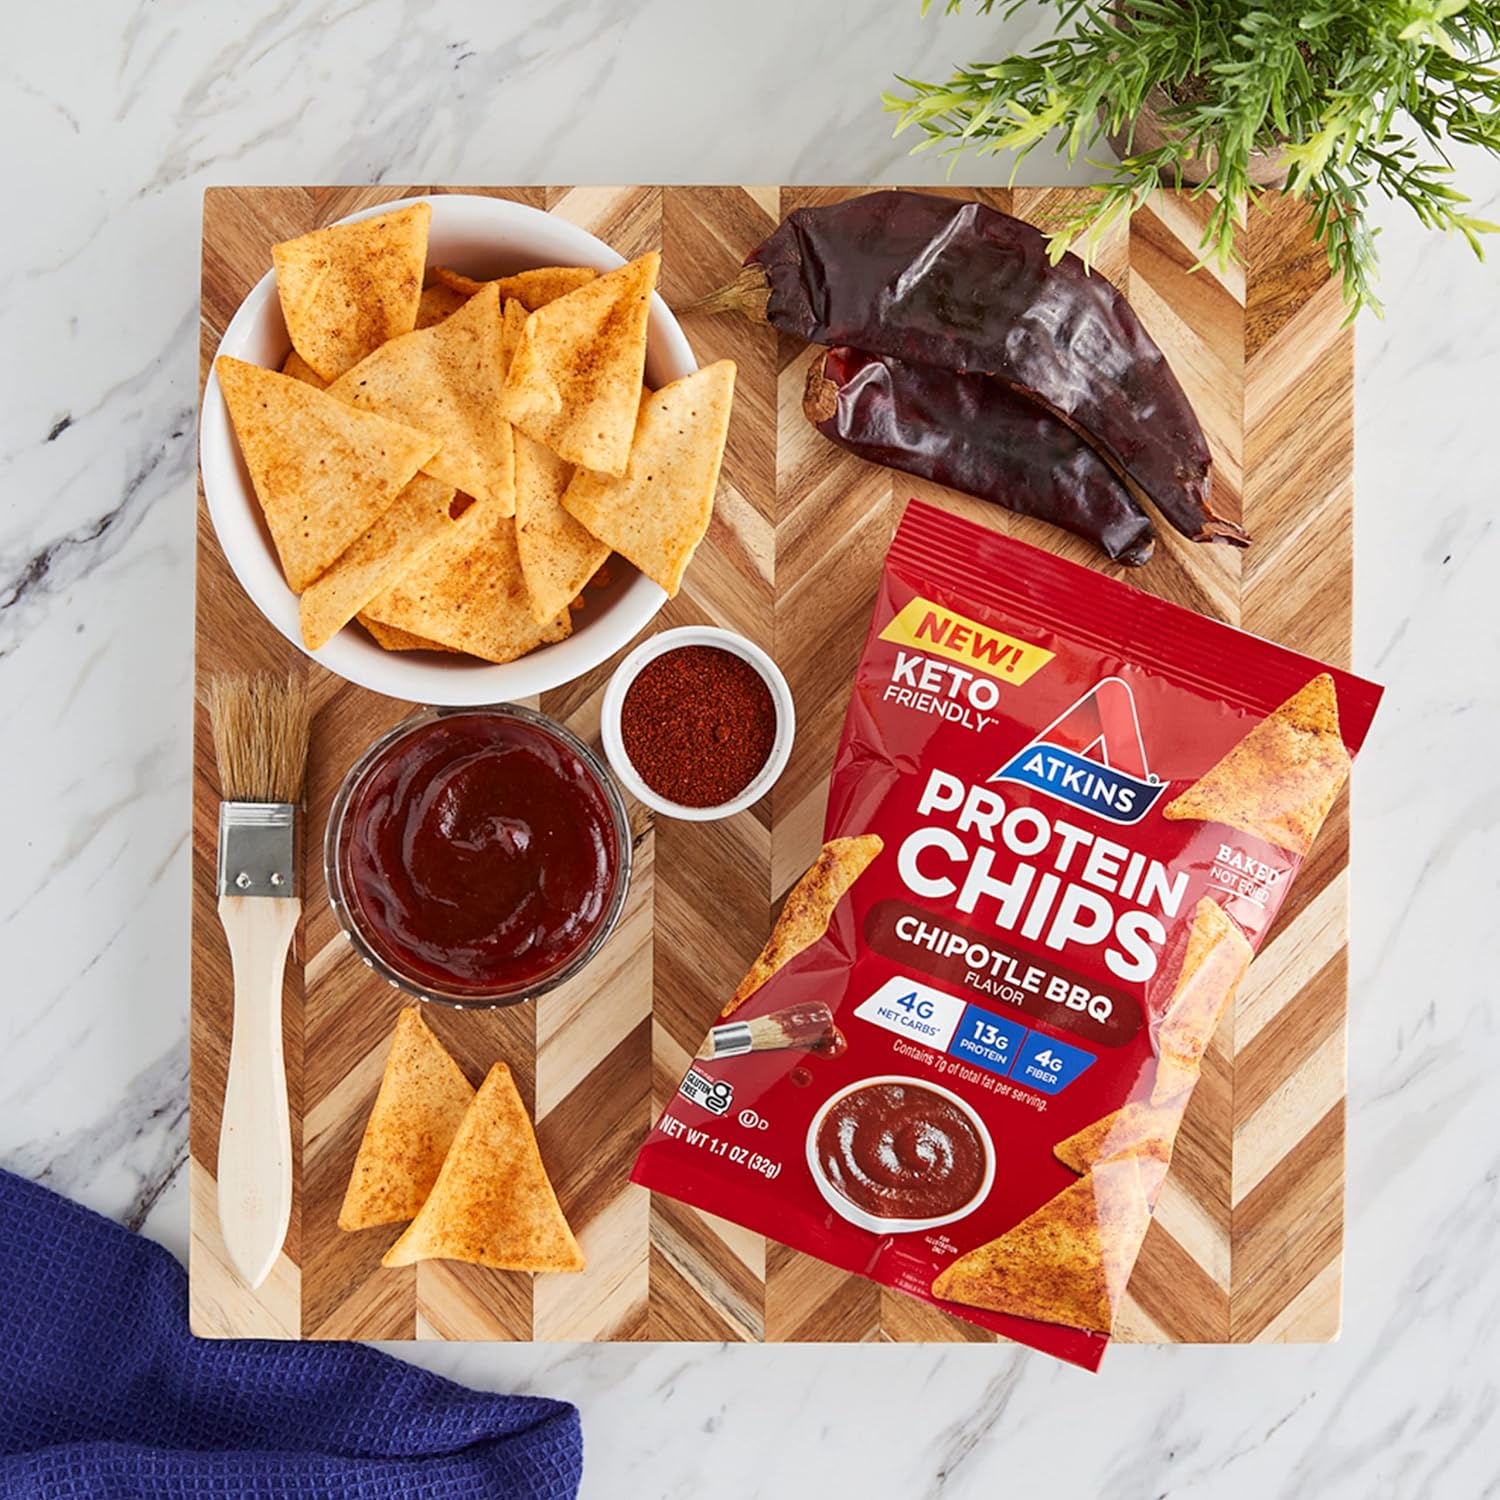 Atkins Chipotle BBQ Protein Chips, 4g Net Carbs, 13g Protein, Gluten Free, Low Glycemic, Keto Friendly, 12 Count : Health & Household